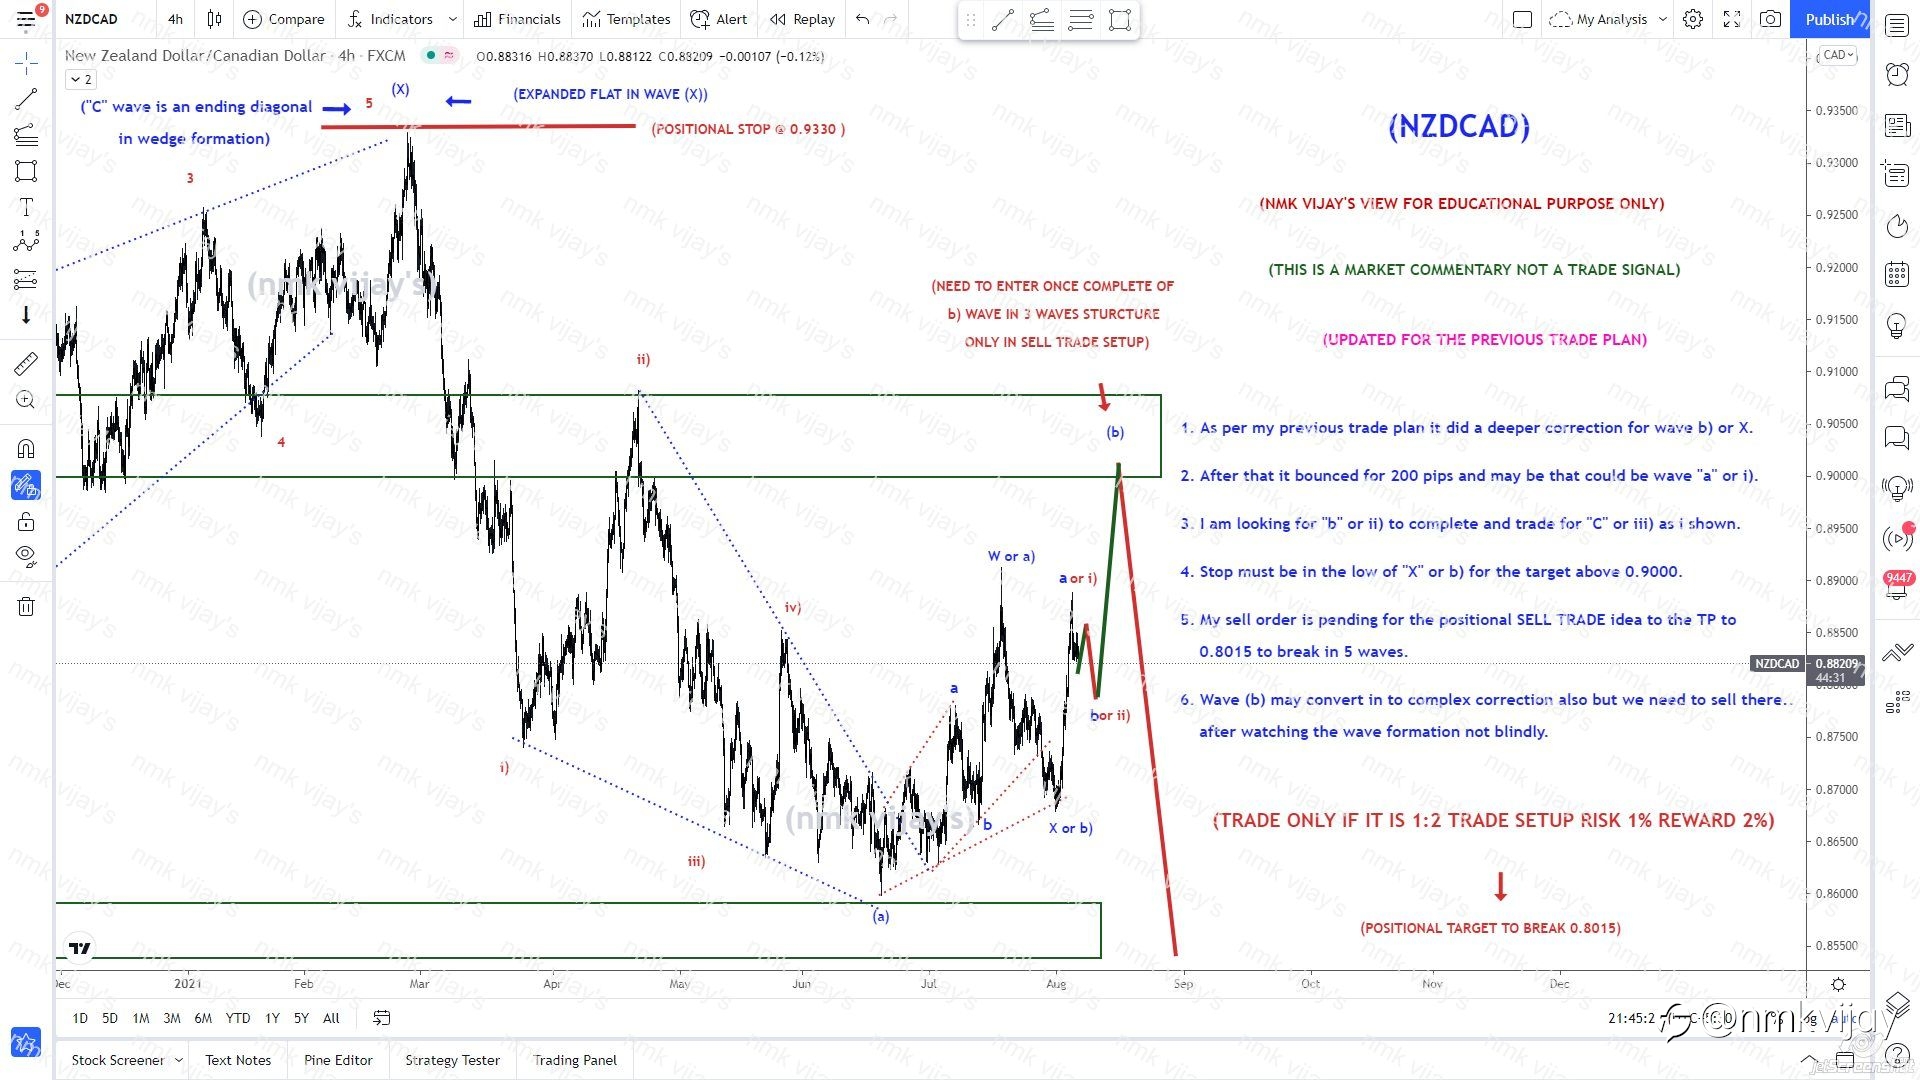 NZDCAD-200 pips bounced after completion of wave X or b)